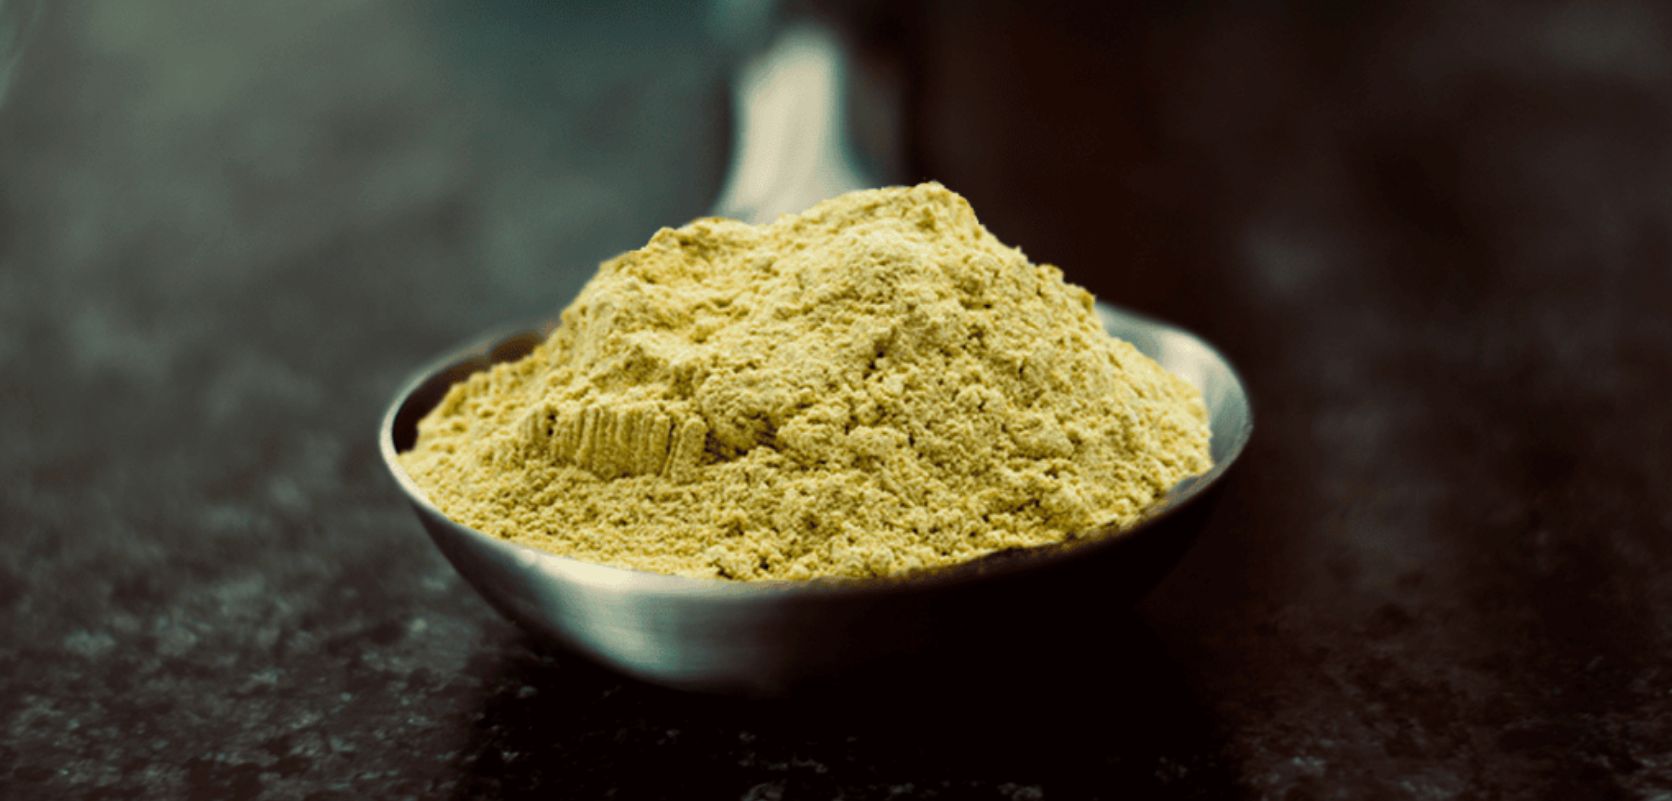 Keef weed, also known as kief, dust, or chief is a potent cannabis product known for its effects and versatility. But what is keef weed exactly?